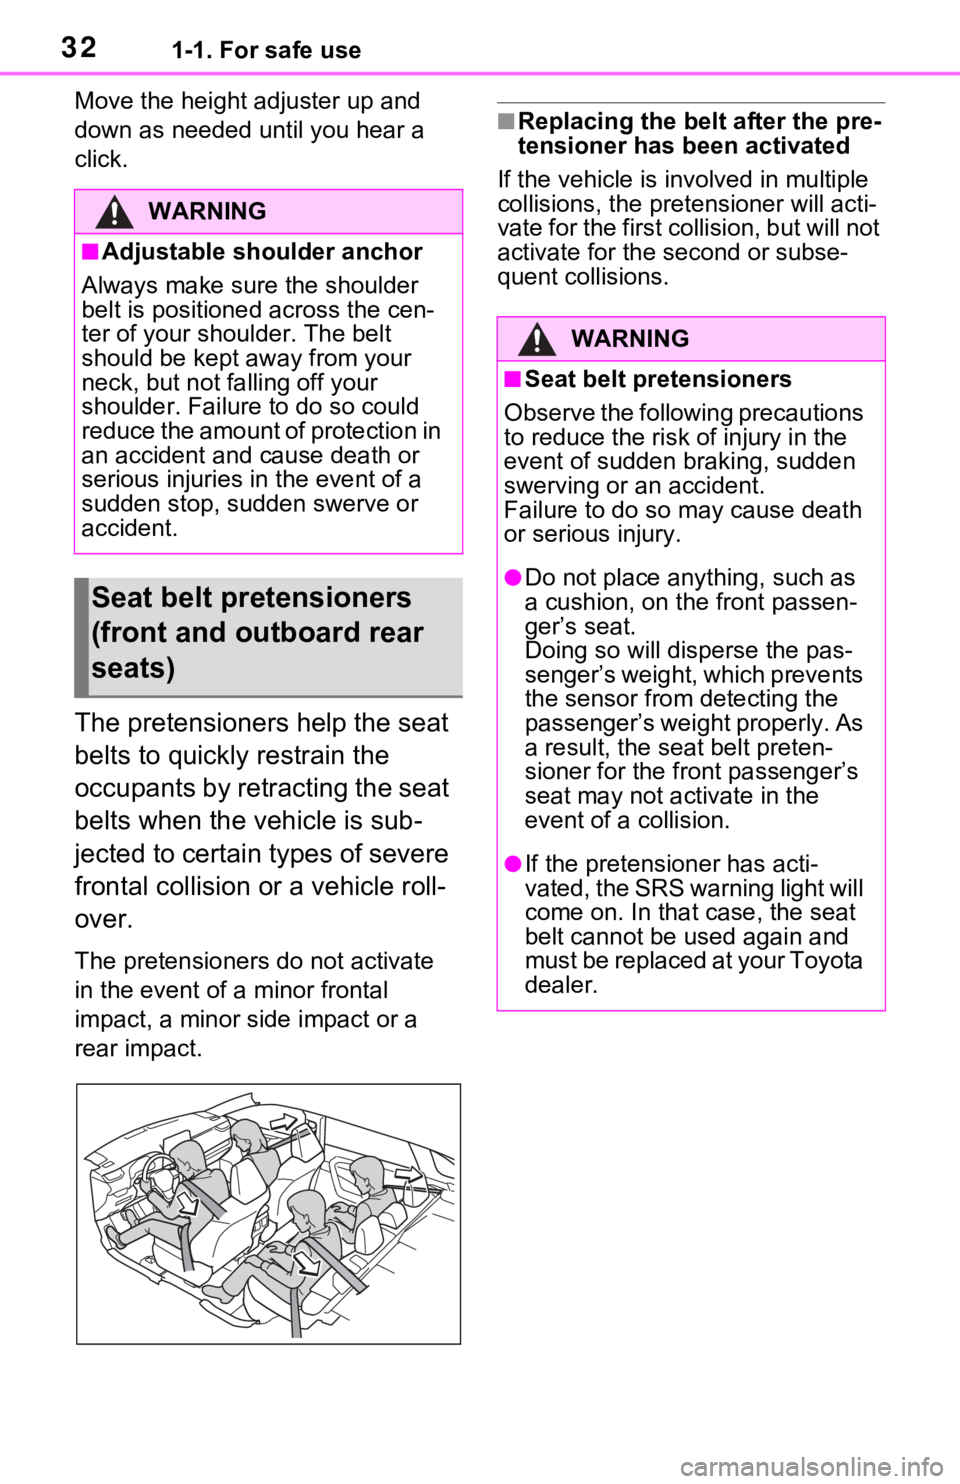 TOYOTA RAV4 2021  Owners Manual (in English) 321-1. For safe use
Move the height adjuster up and 
down as needed until you hear a 
click.
The pretensioners help the seat 
belts to quickly restrain the 
occupants by retracting the seat 
belts whe